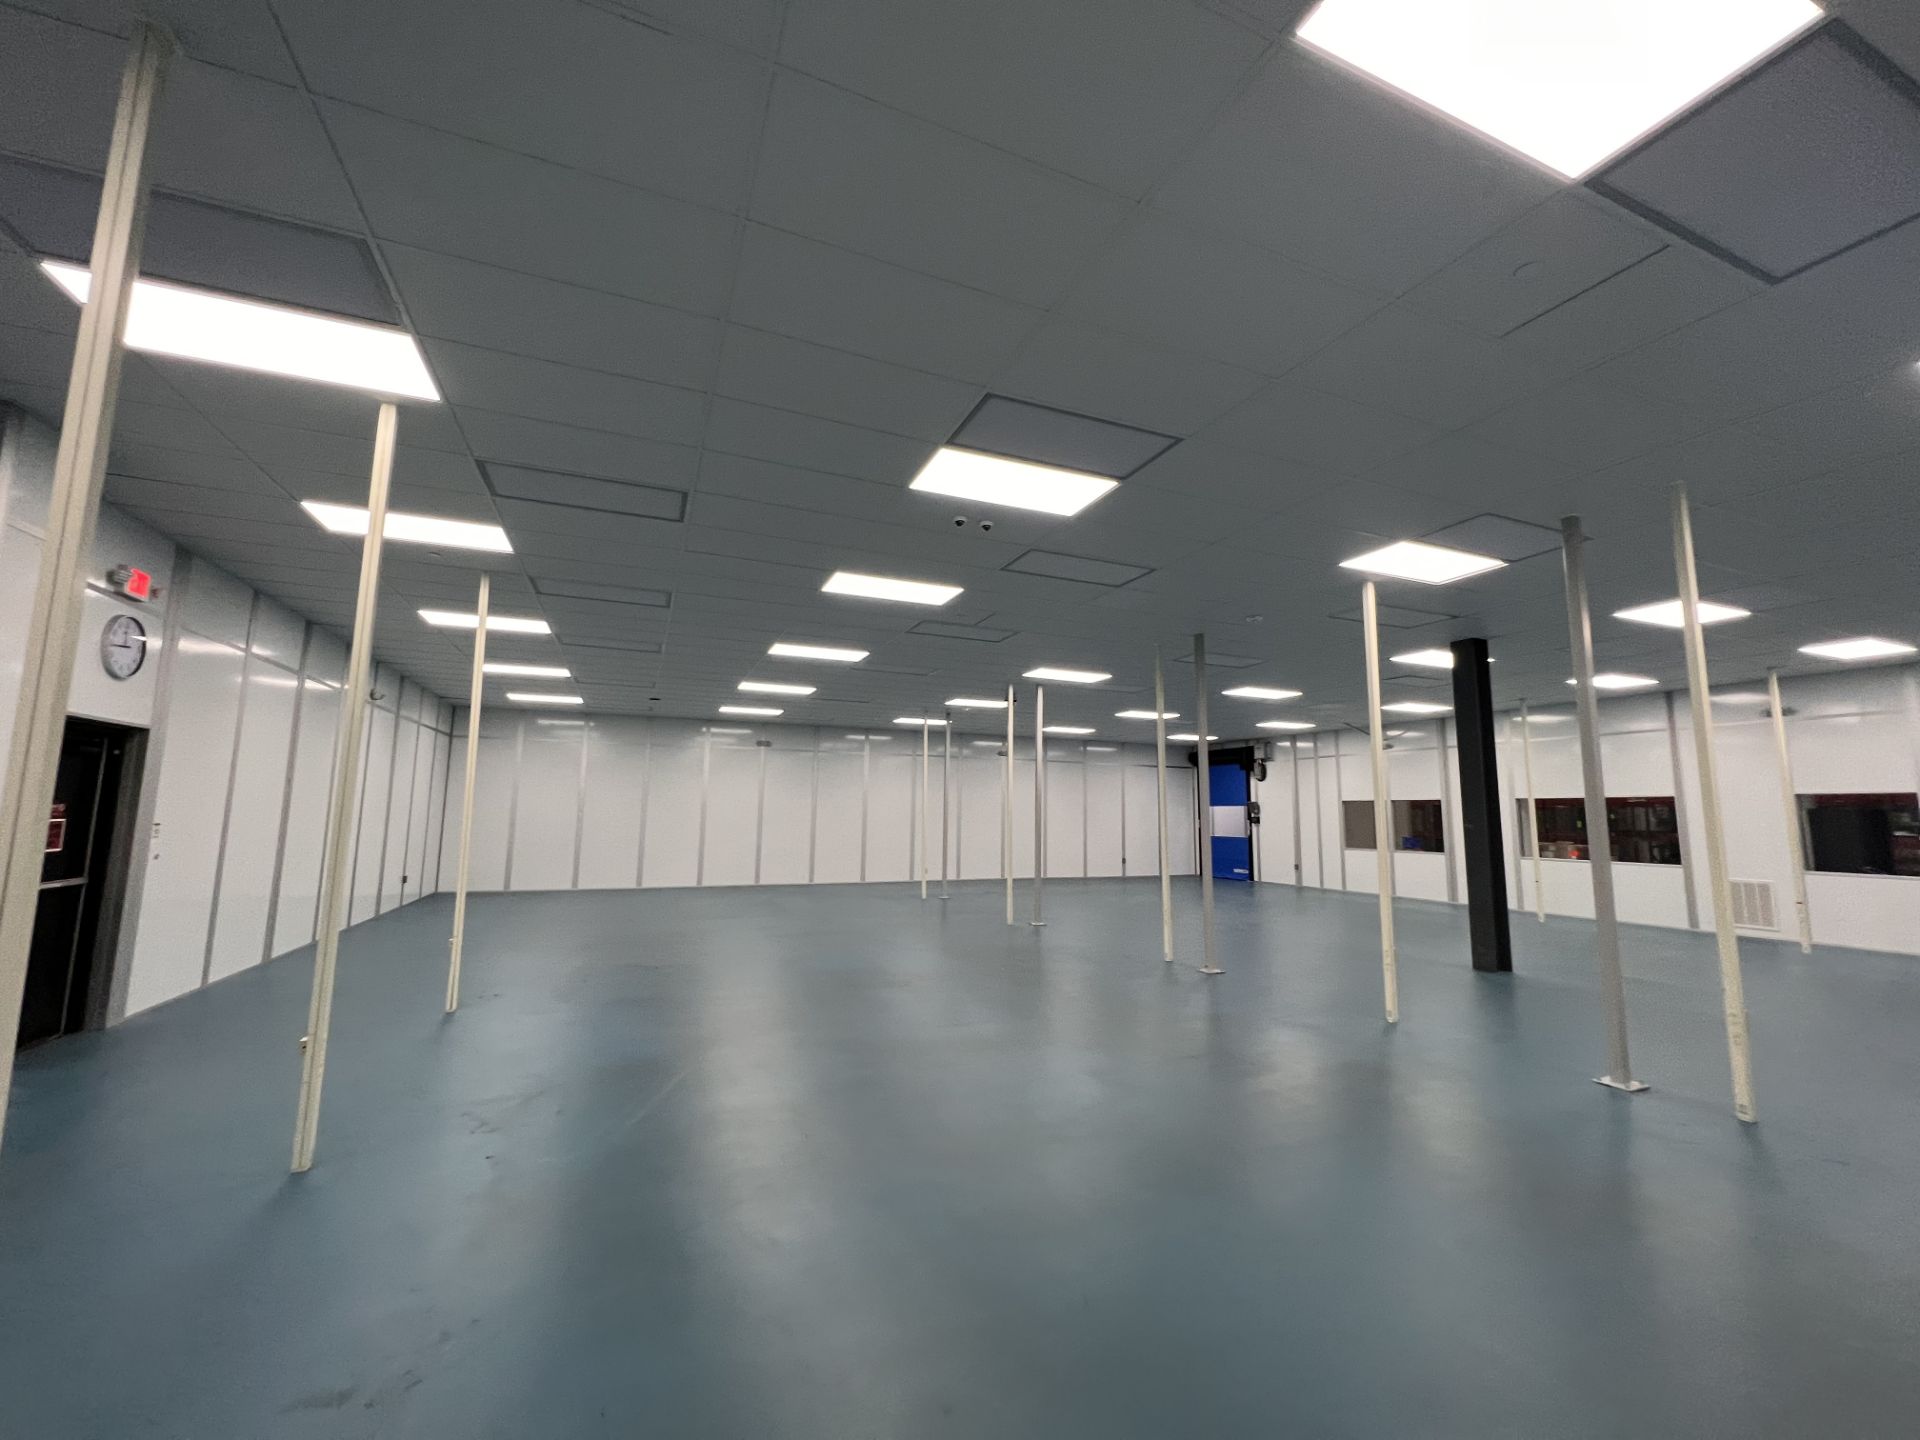 MODULAR CLEAN ROOM, APPROX. 60 FT X 60 FT X 11 FT 10 IN, INCLUDES HEPA FILTRATION UNITS - Image 18 of 34